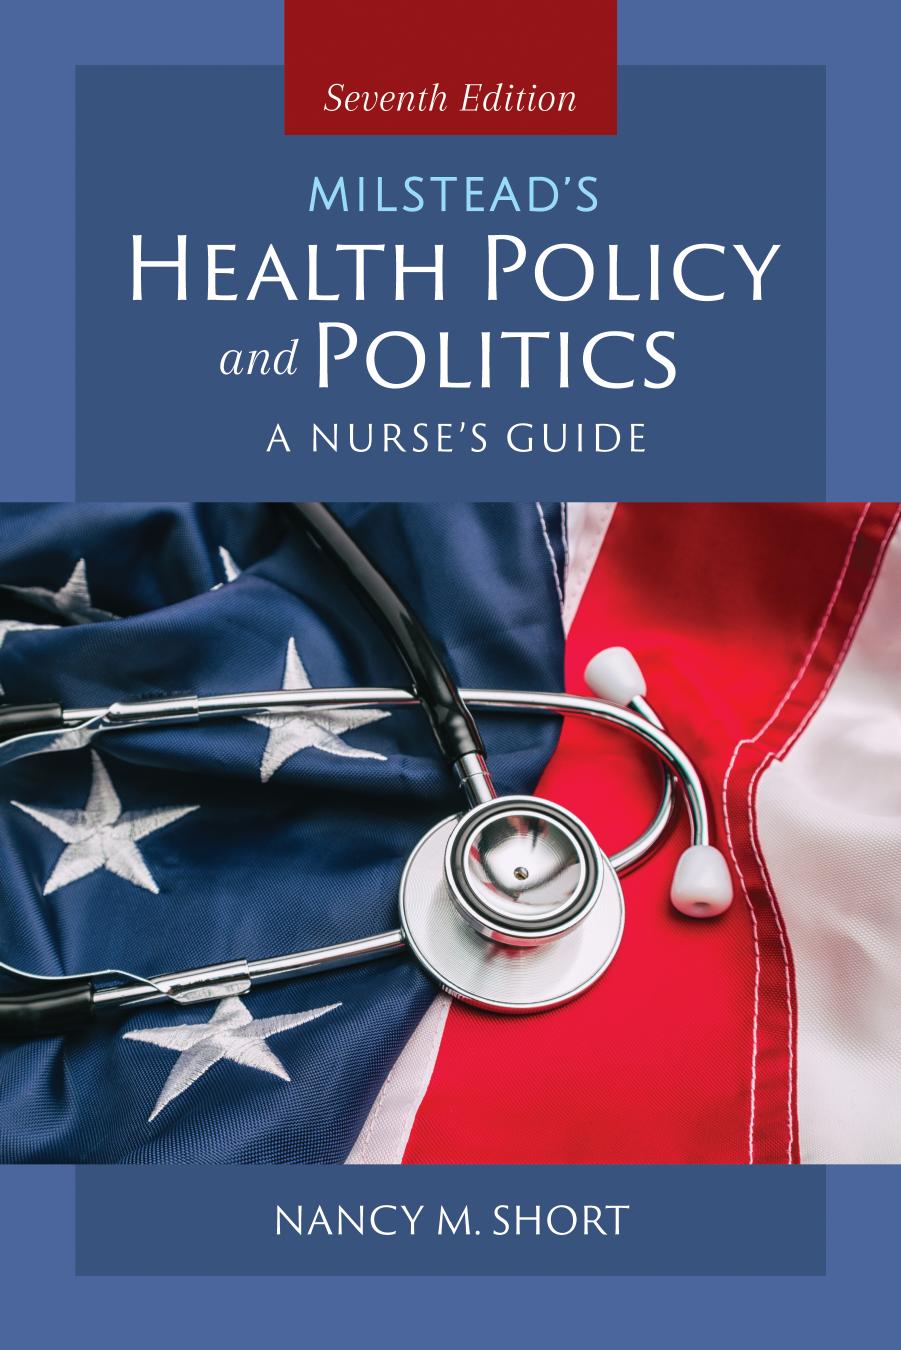 (eBook PDF)Milstead＆＃39;s Health Policy and Politics 7th Edition by Nancy M. Short